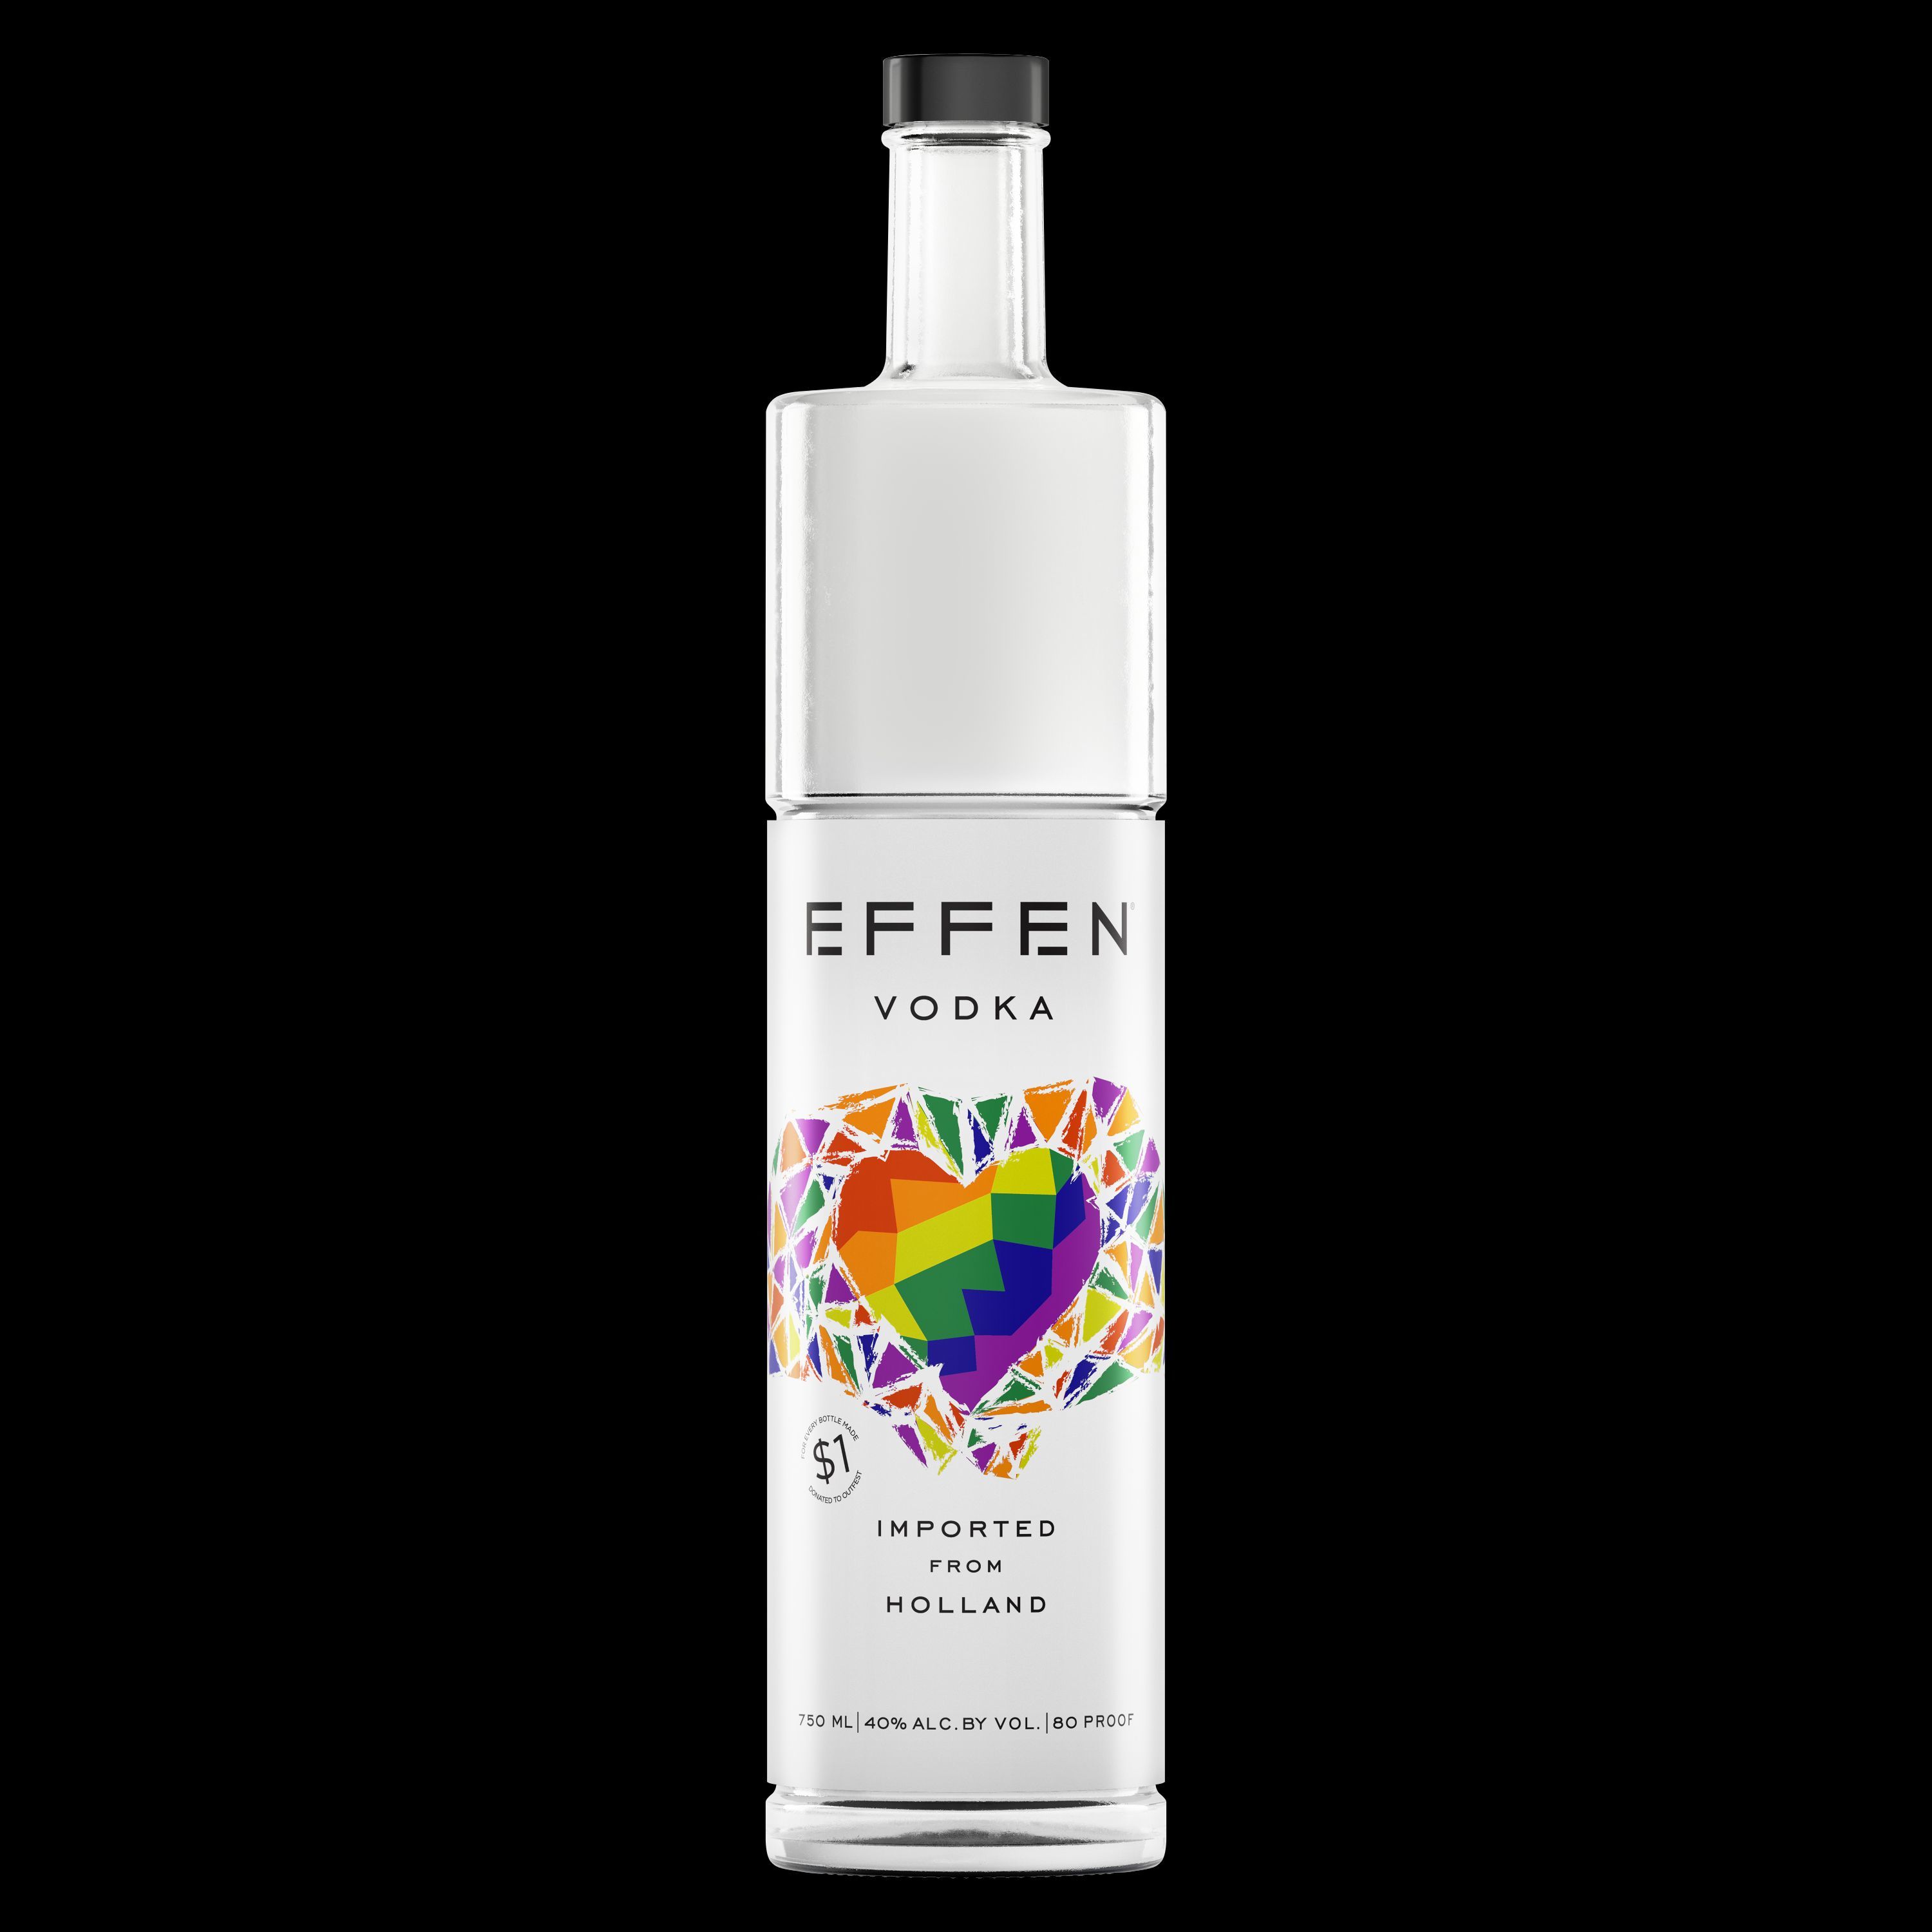 Effen Vodka Is Ready To Celebrate Pride With Their Limited Edition Pride Bottle! photo